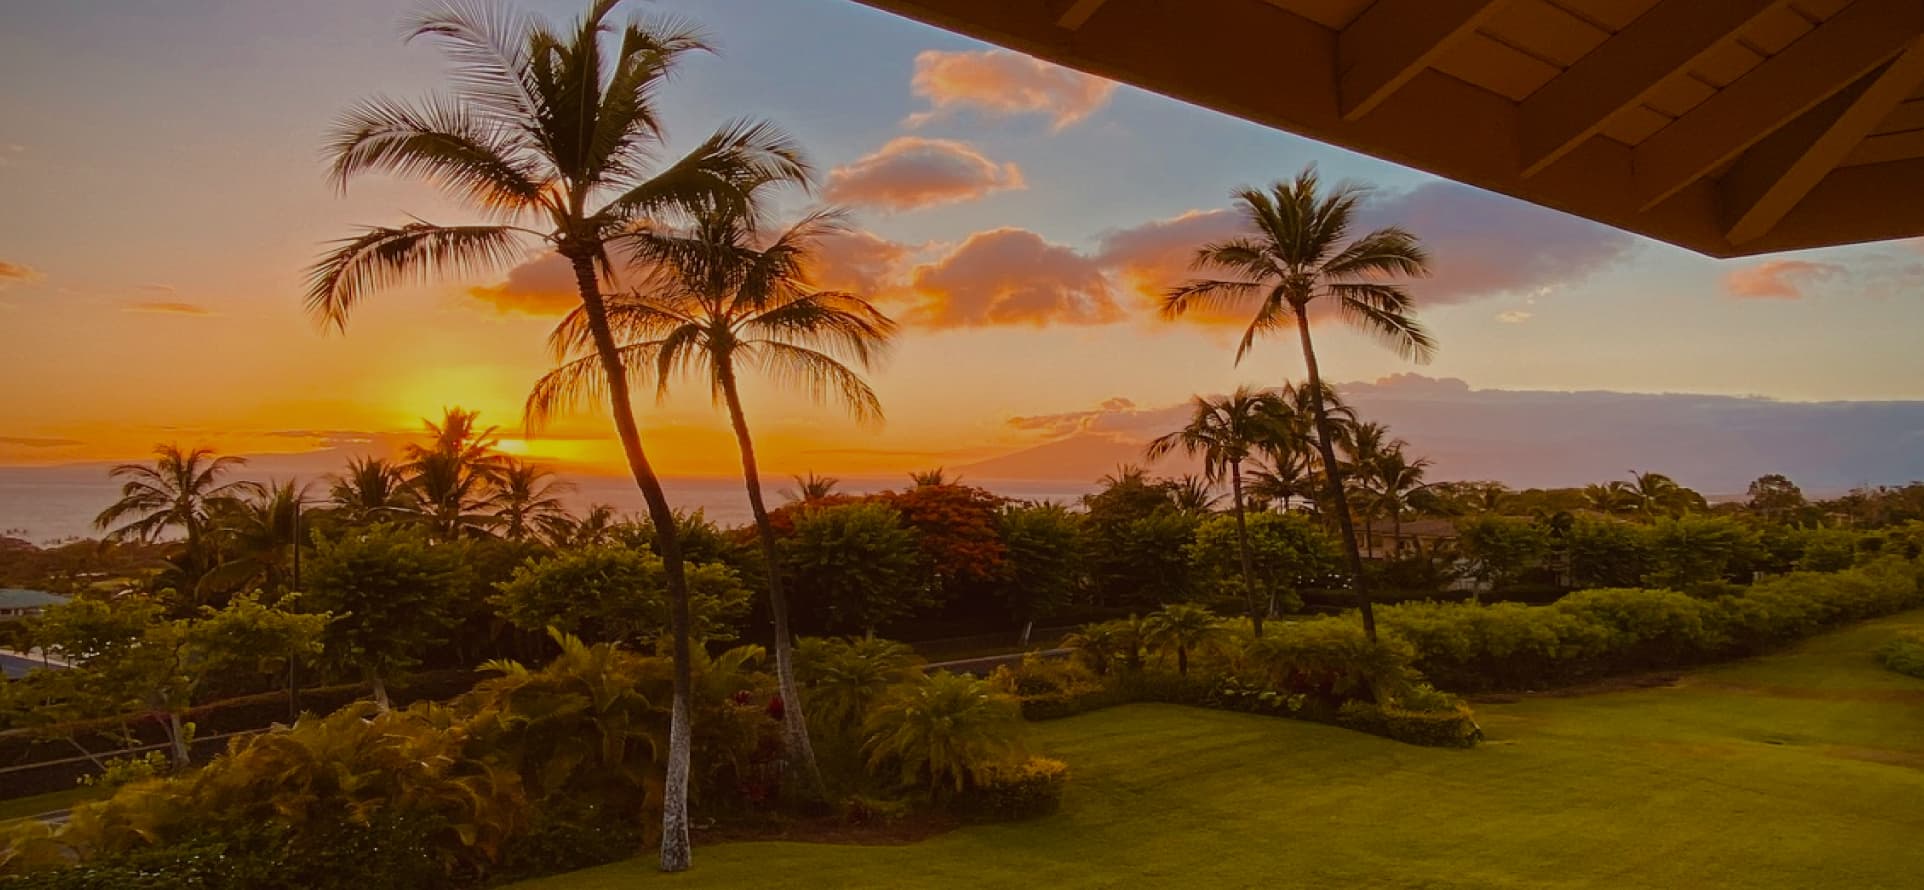 Sunset viewed from a veranda, with a golden sky above a silhouette of an island and the ocean. Two palm trees stand out against the vibrant colors. The foreground shows a neatly trimmed lawn and assorted tropical plants.